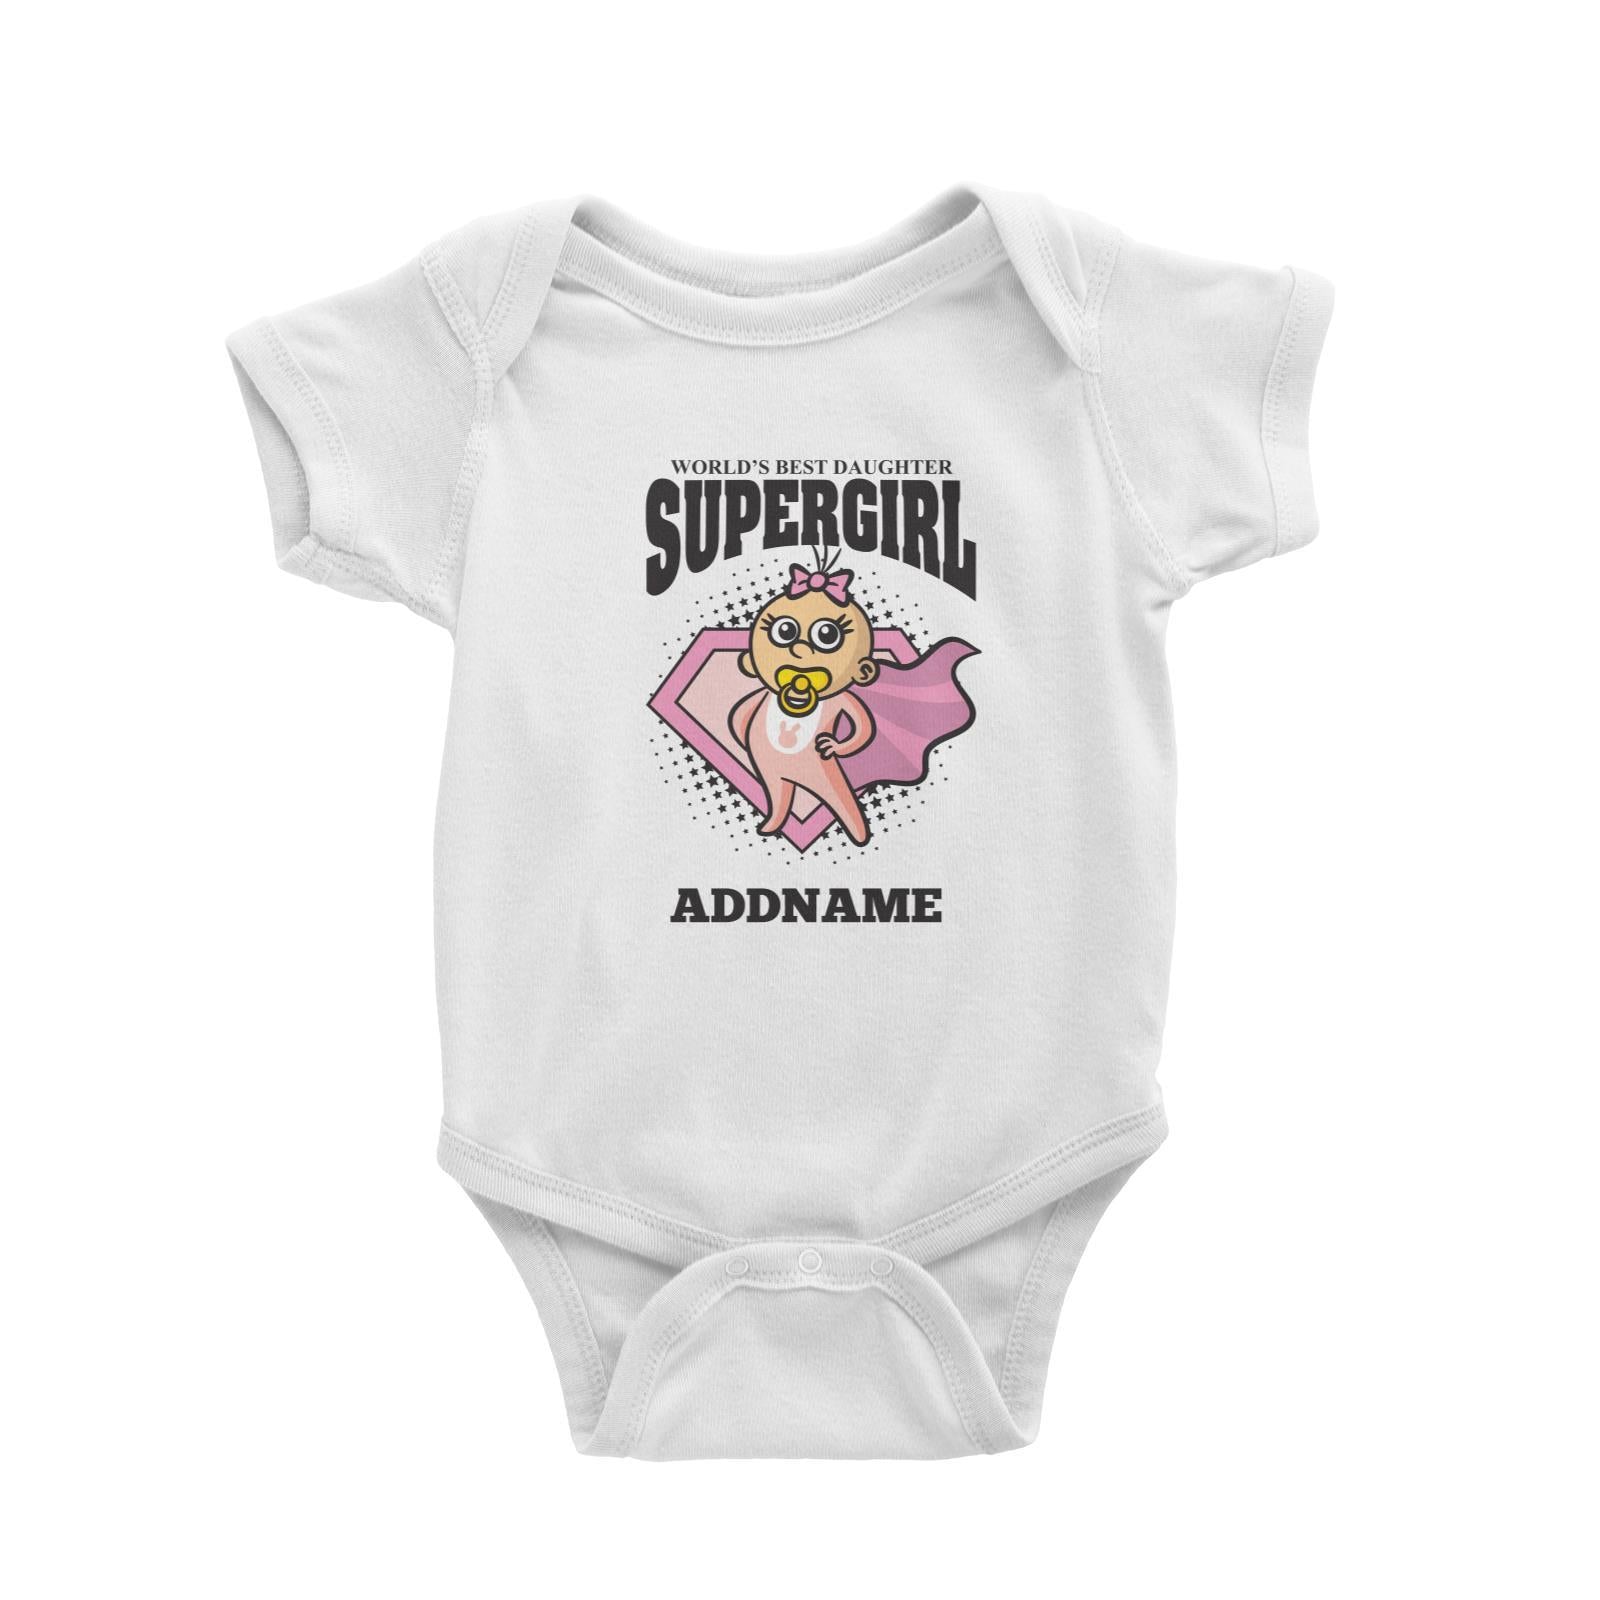 Best Daughter Supergirl Baby Baby Romper Personalizable Designs Matching Family Superhero Family Edition Superhero